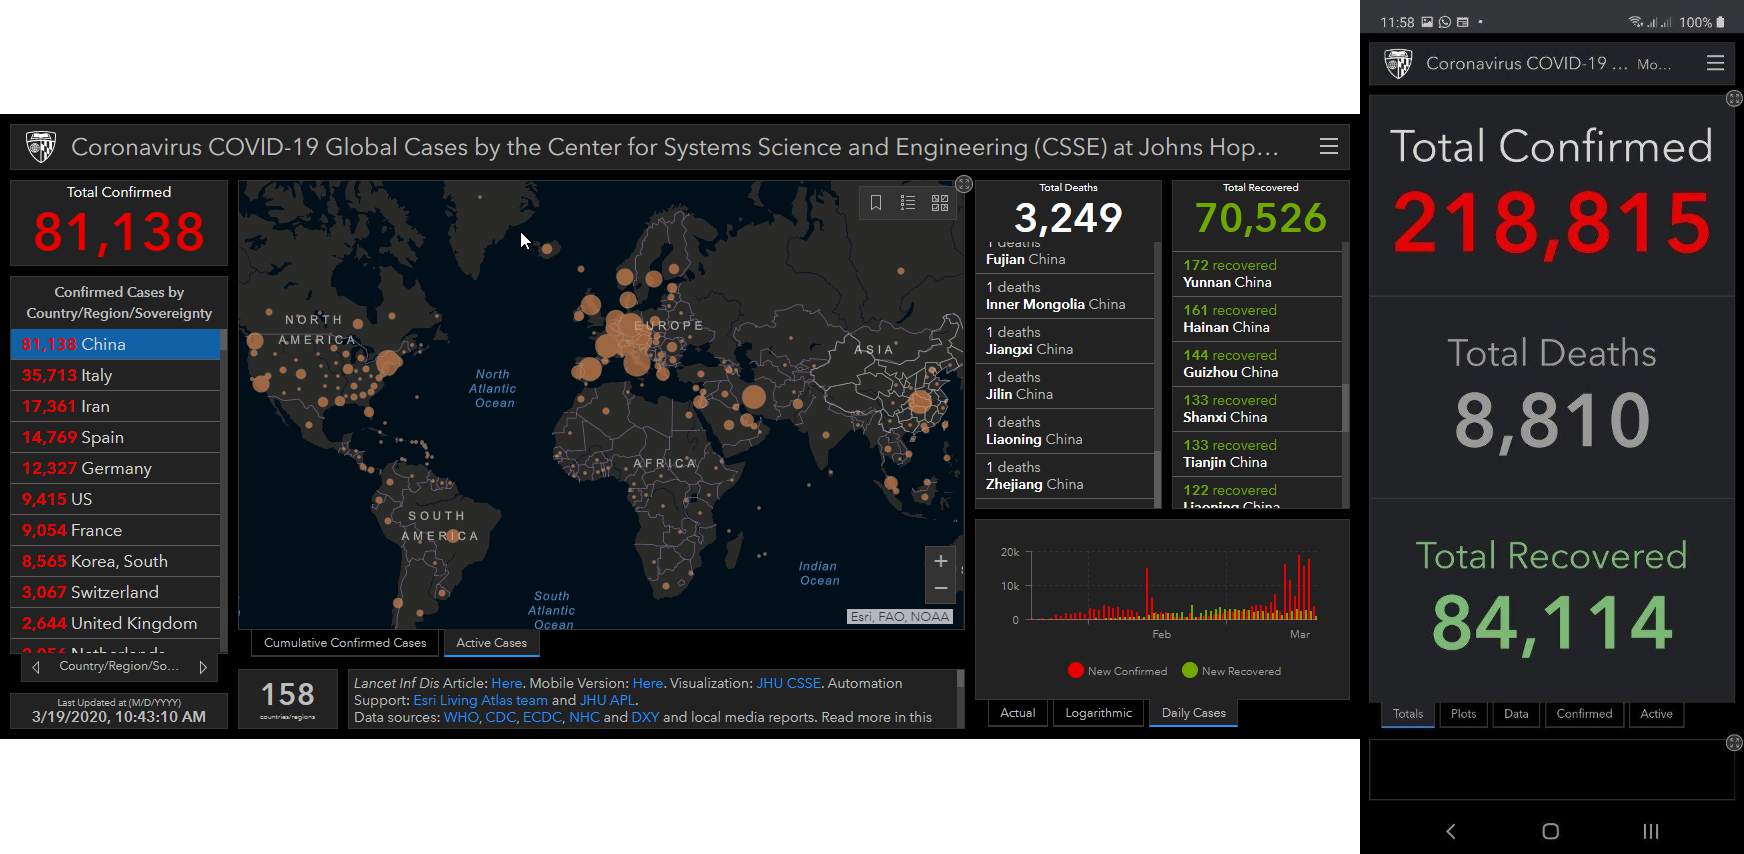 see the real-time information about coronavirus infected humans